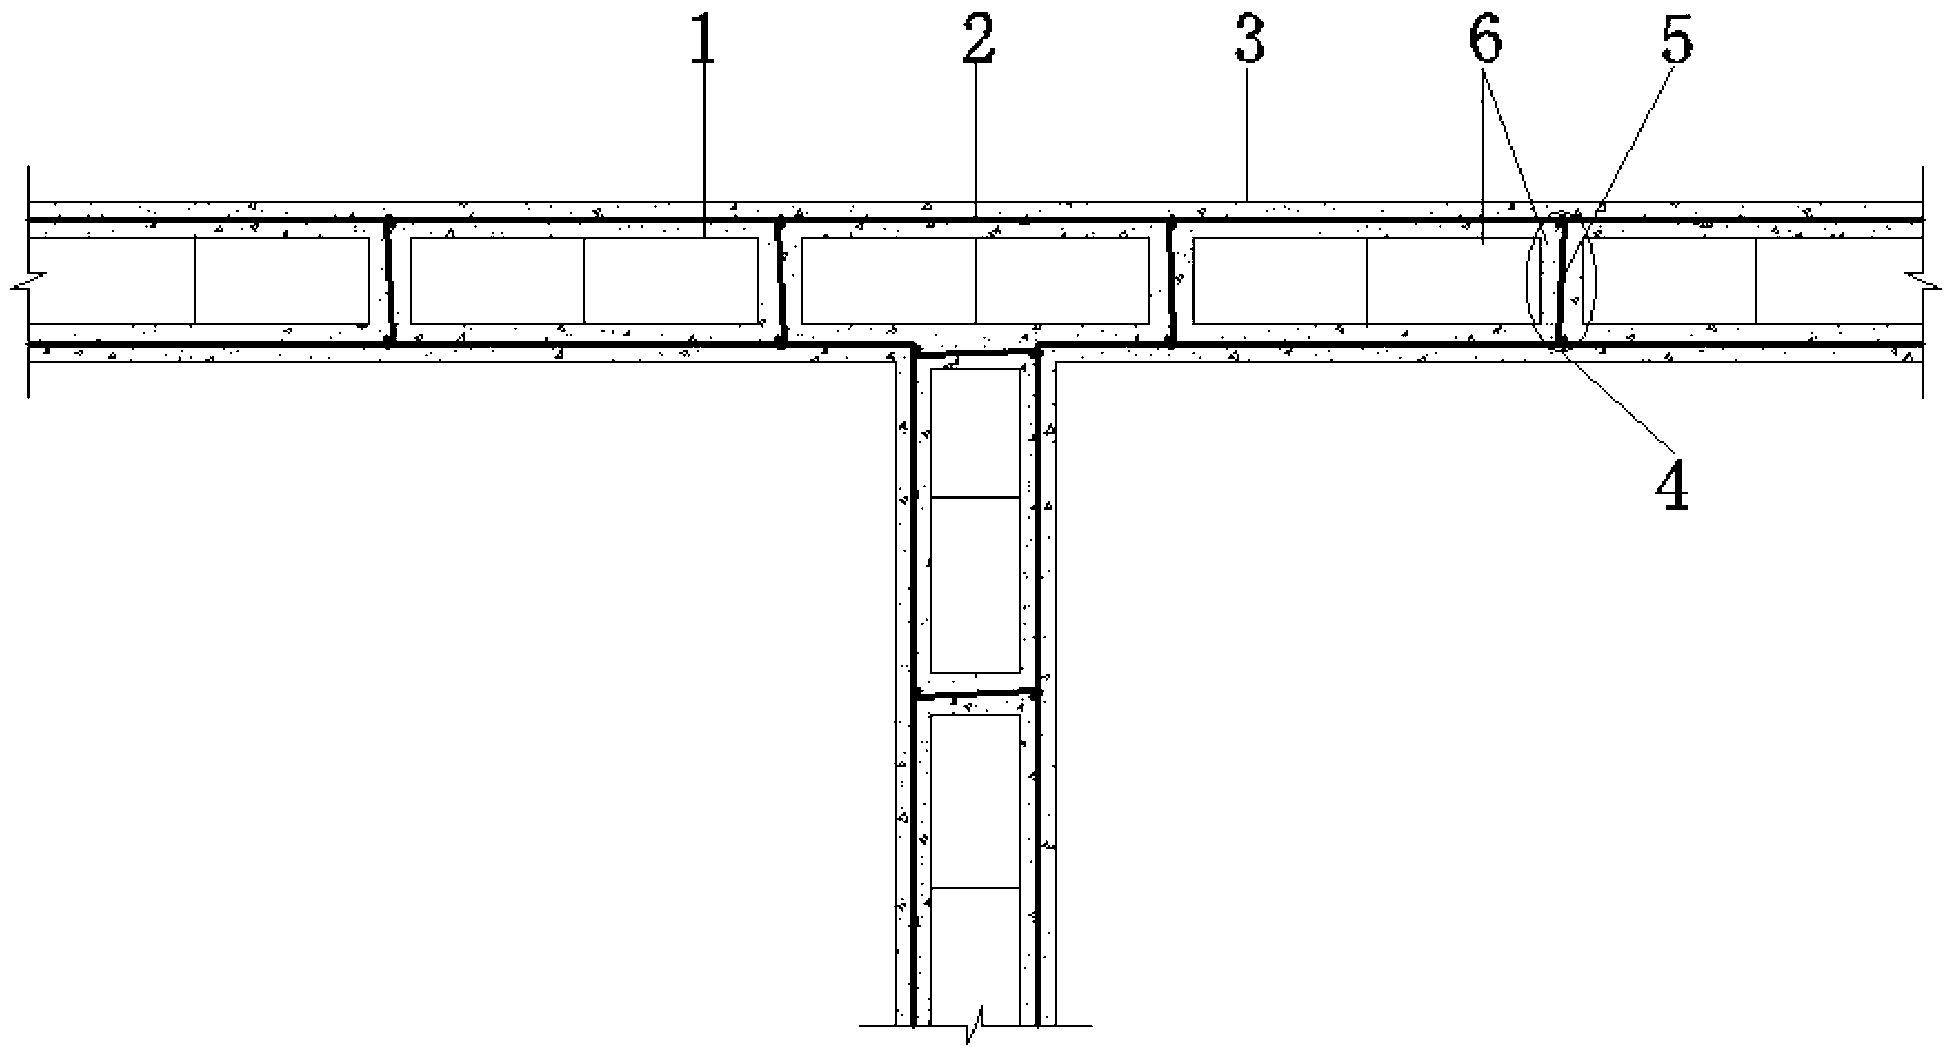 Combined wall with connecting keys and waste brick masonries filled in regenerated concrete wall boards and fabrication method of combined wall